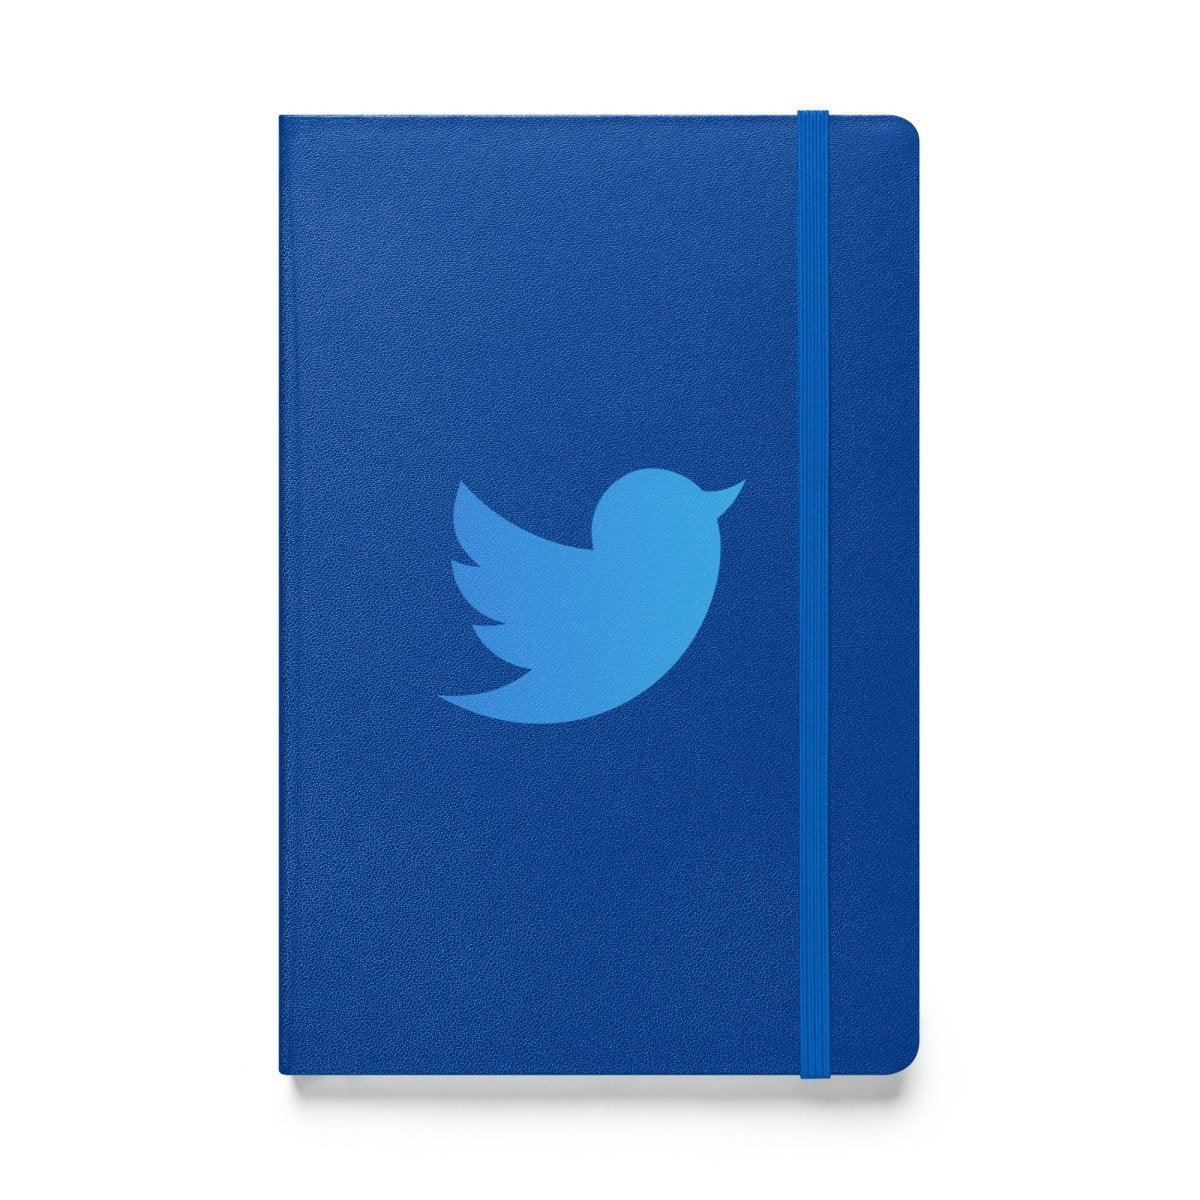 Twitter Icon Hardcover Bound Notebook - Blue - AI Store